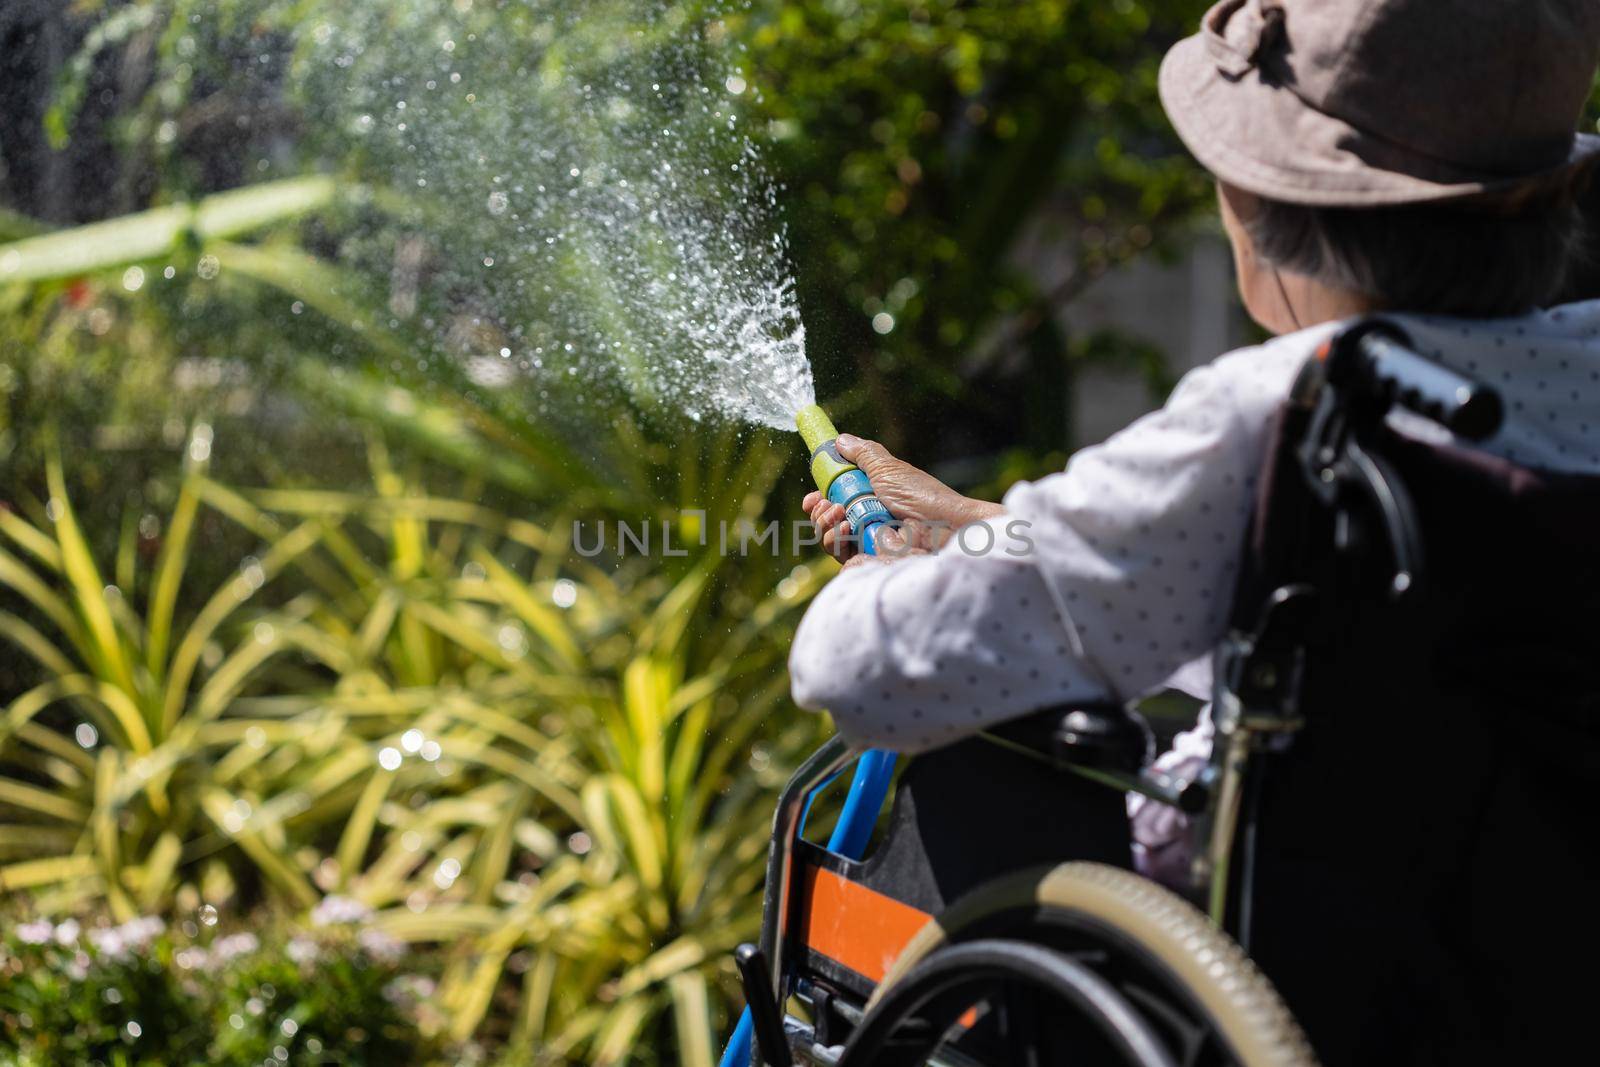 Senior woman hand holding hose sprayer and watering plants in backyard